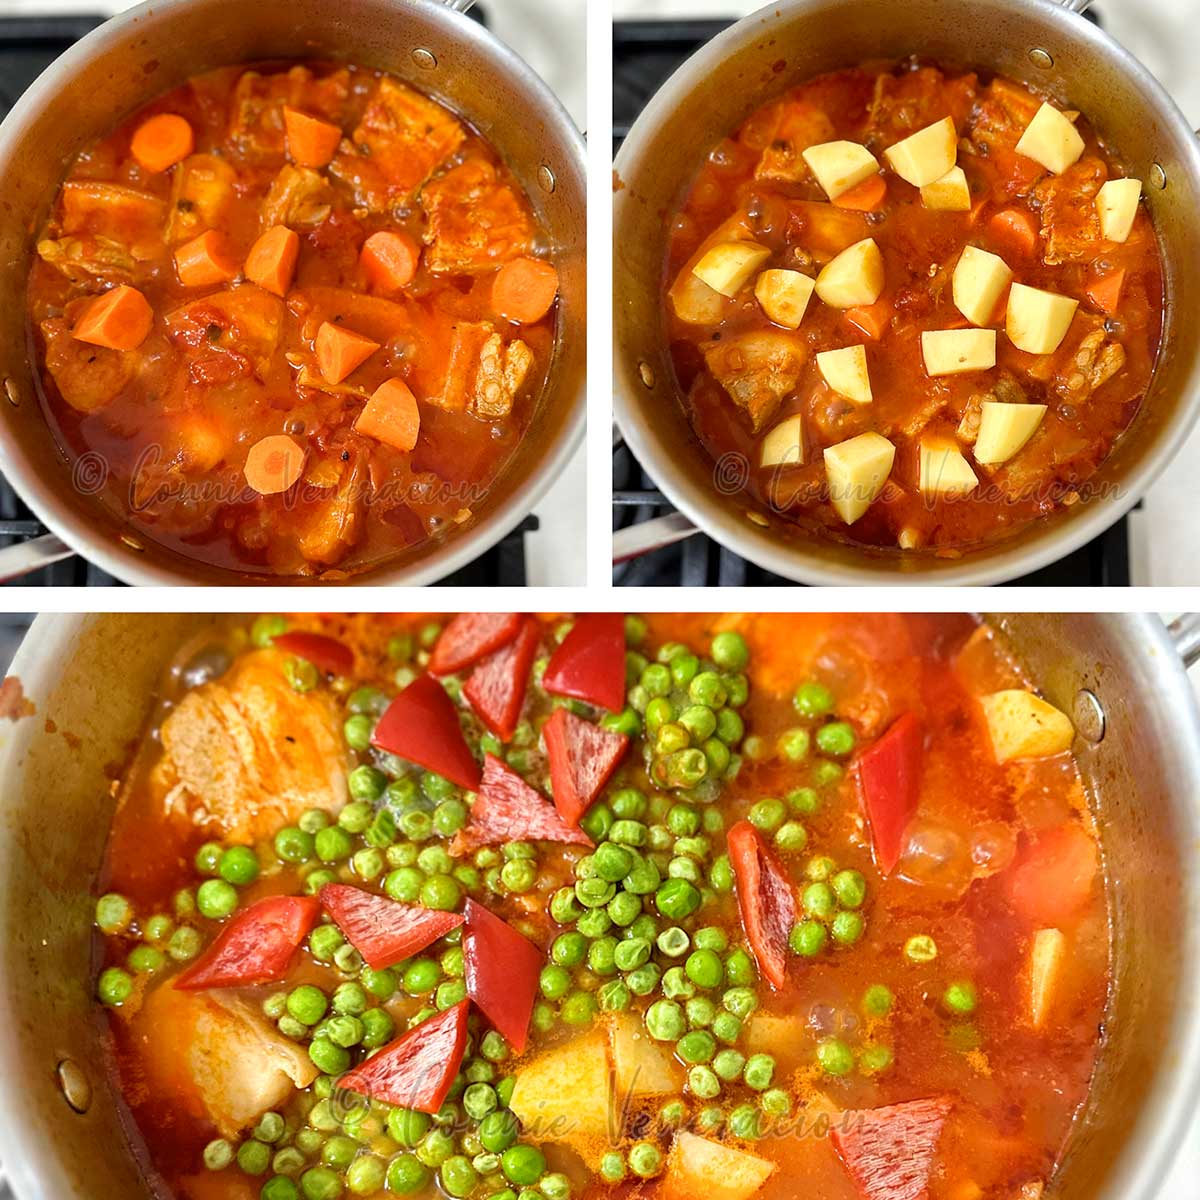 Adding vegetables to pork stewed in tomato sauce